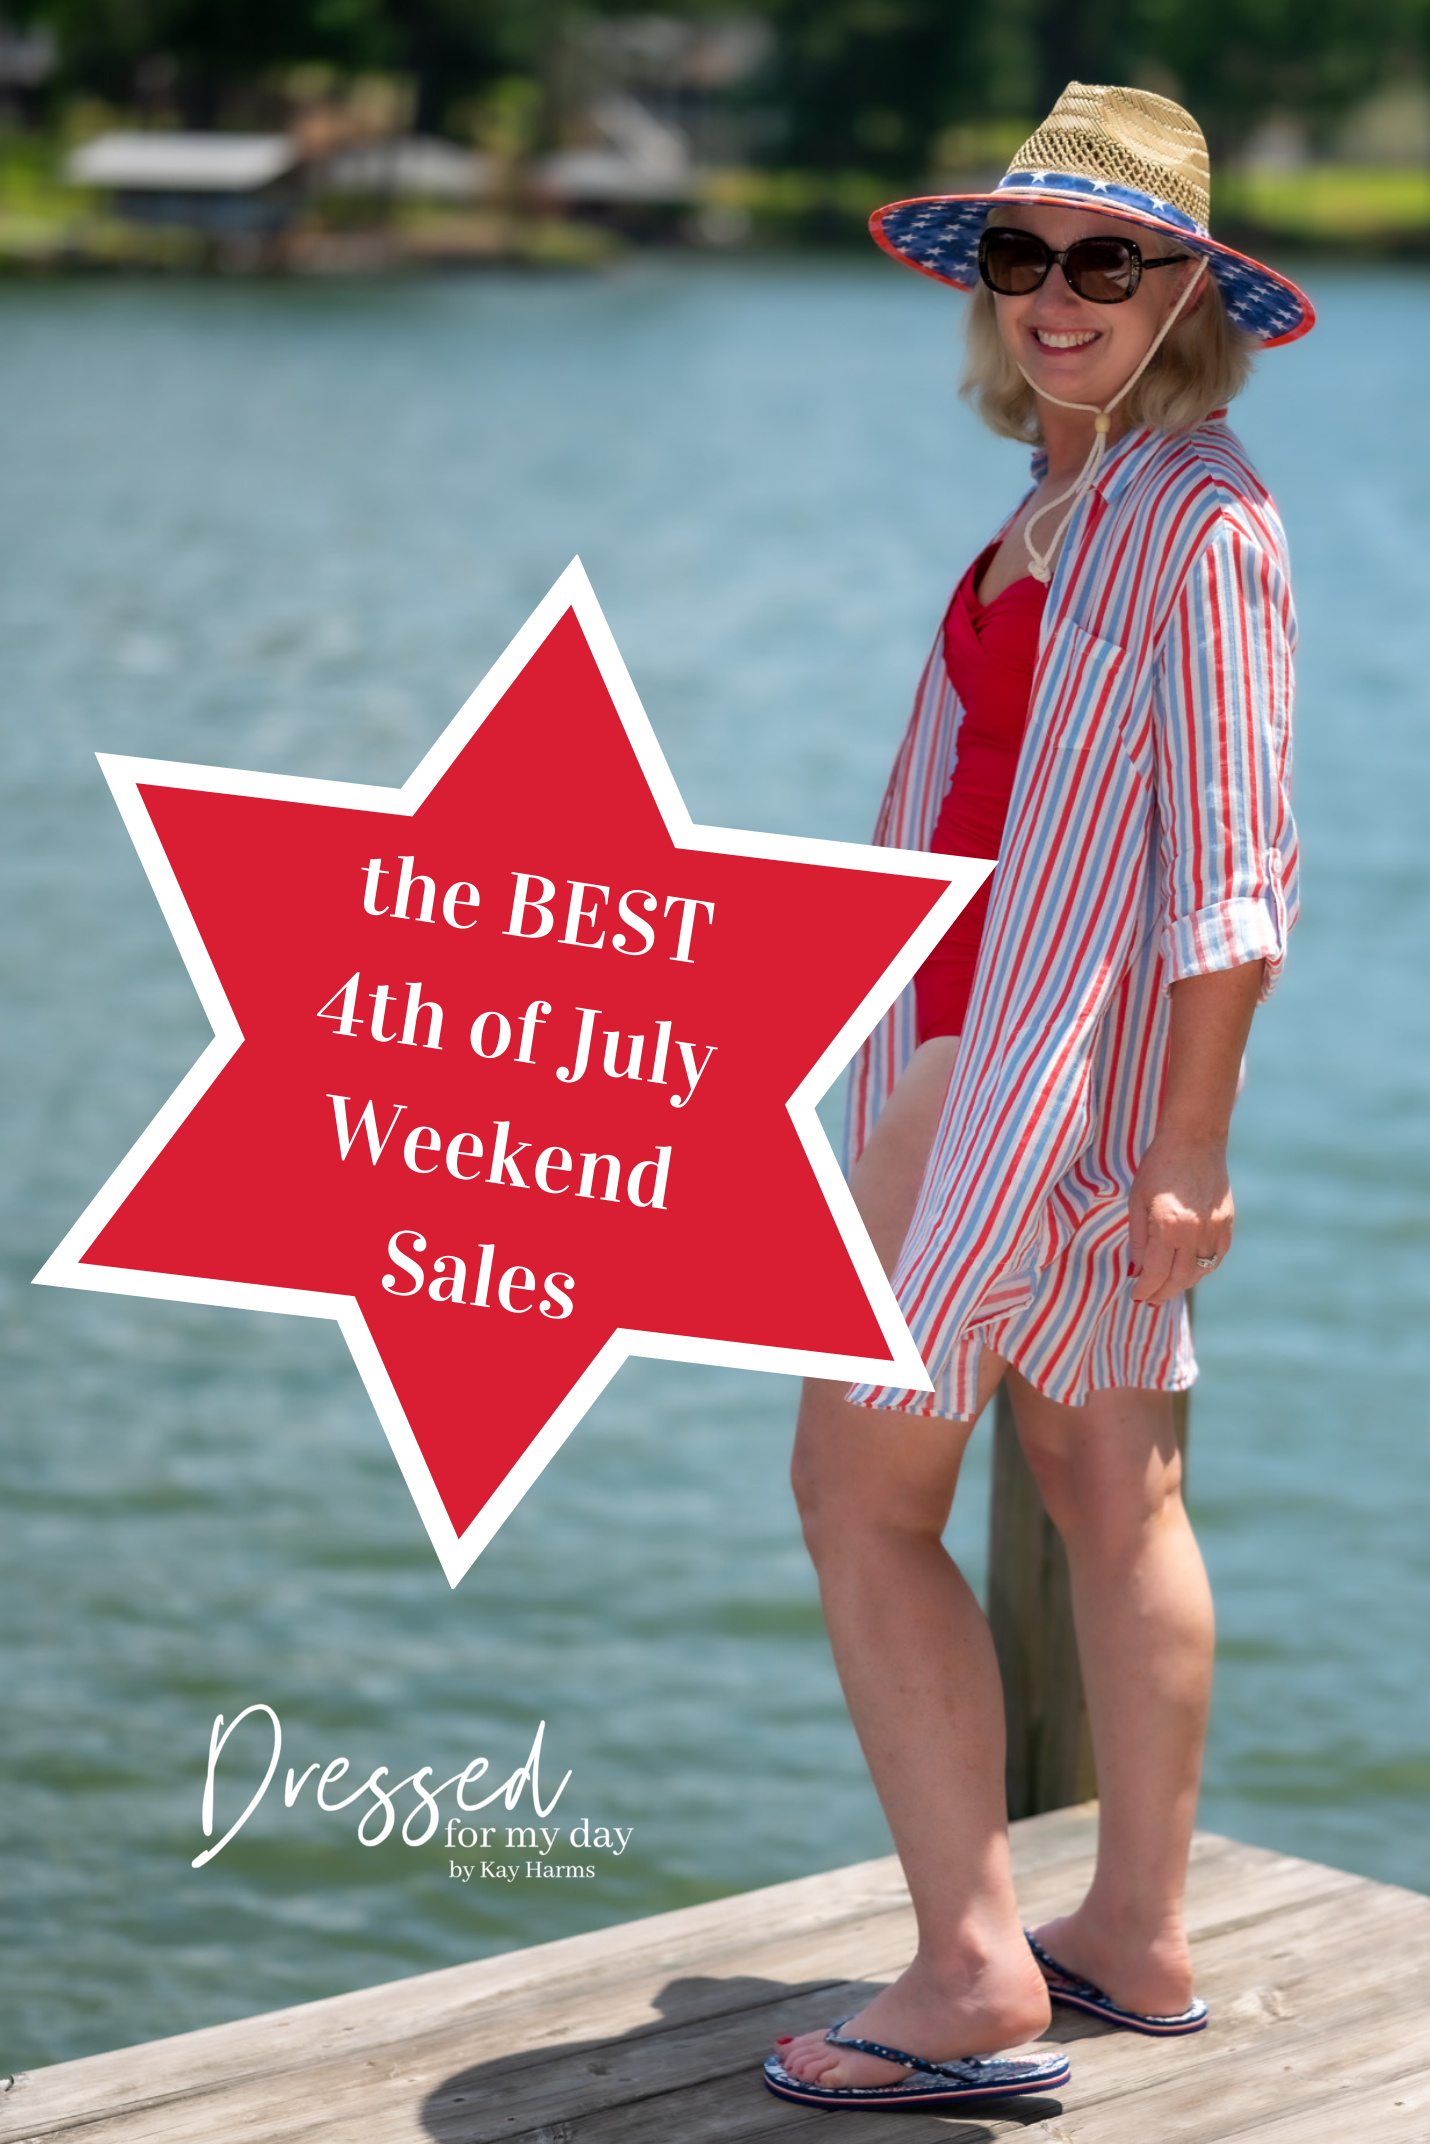 The Best 4th of July Weekend Sales